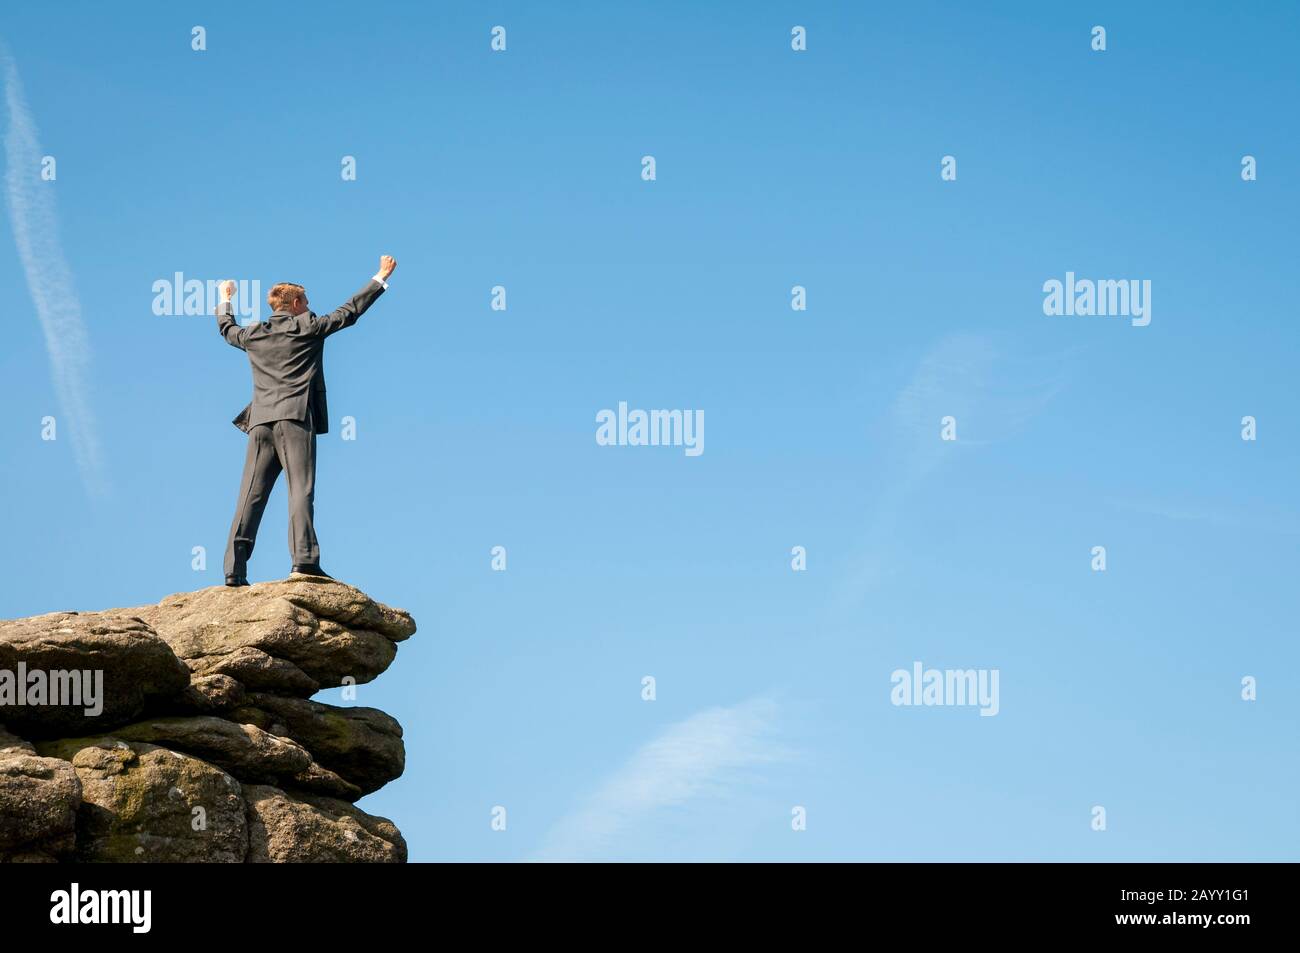 Businessman standing on the top of a distant rocky mountain peak celebrating in blue sky copy space Stock Photo